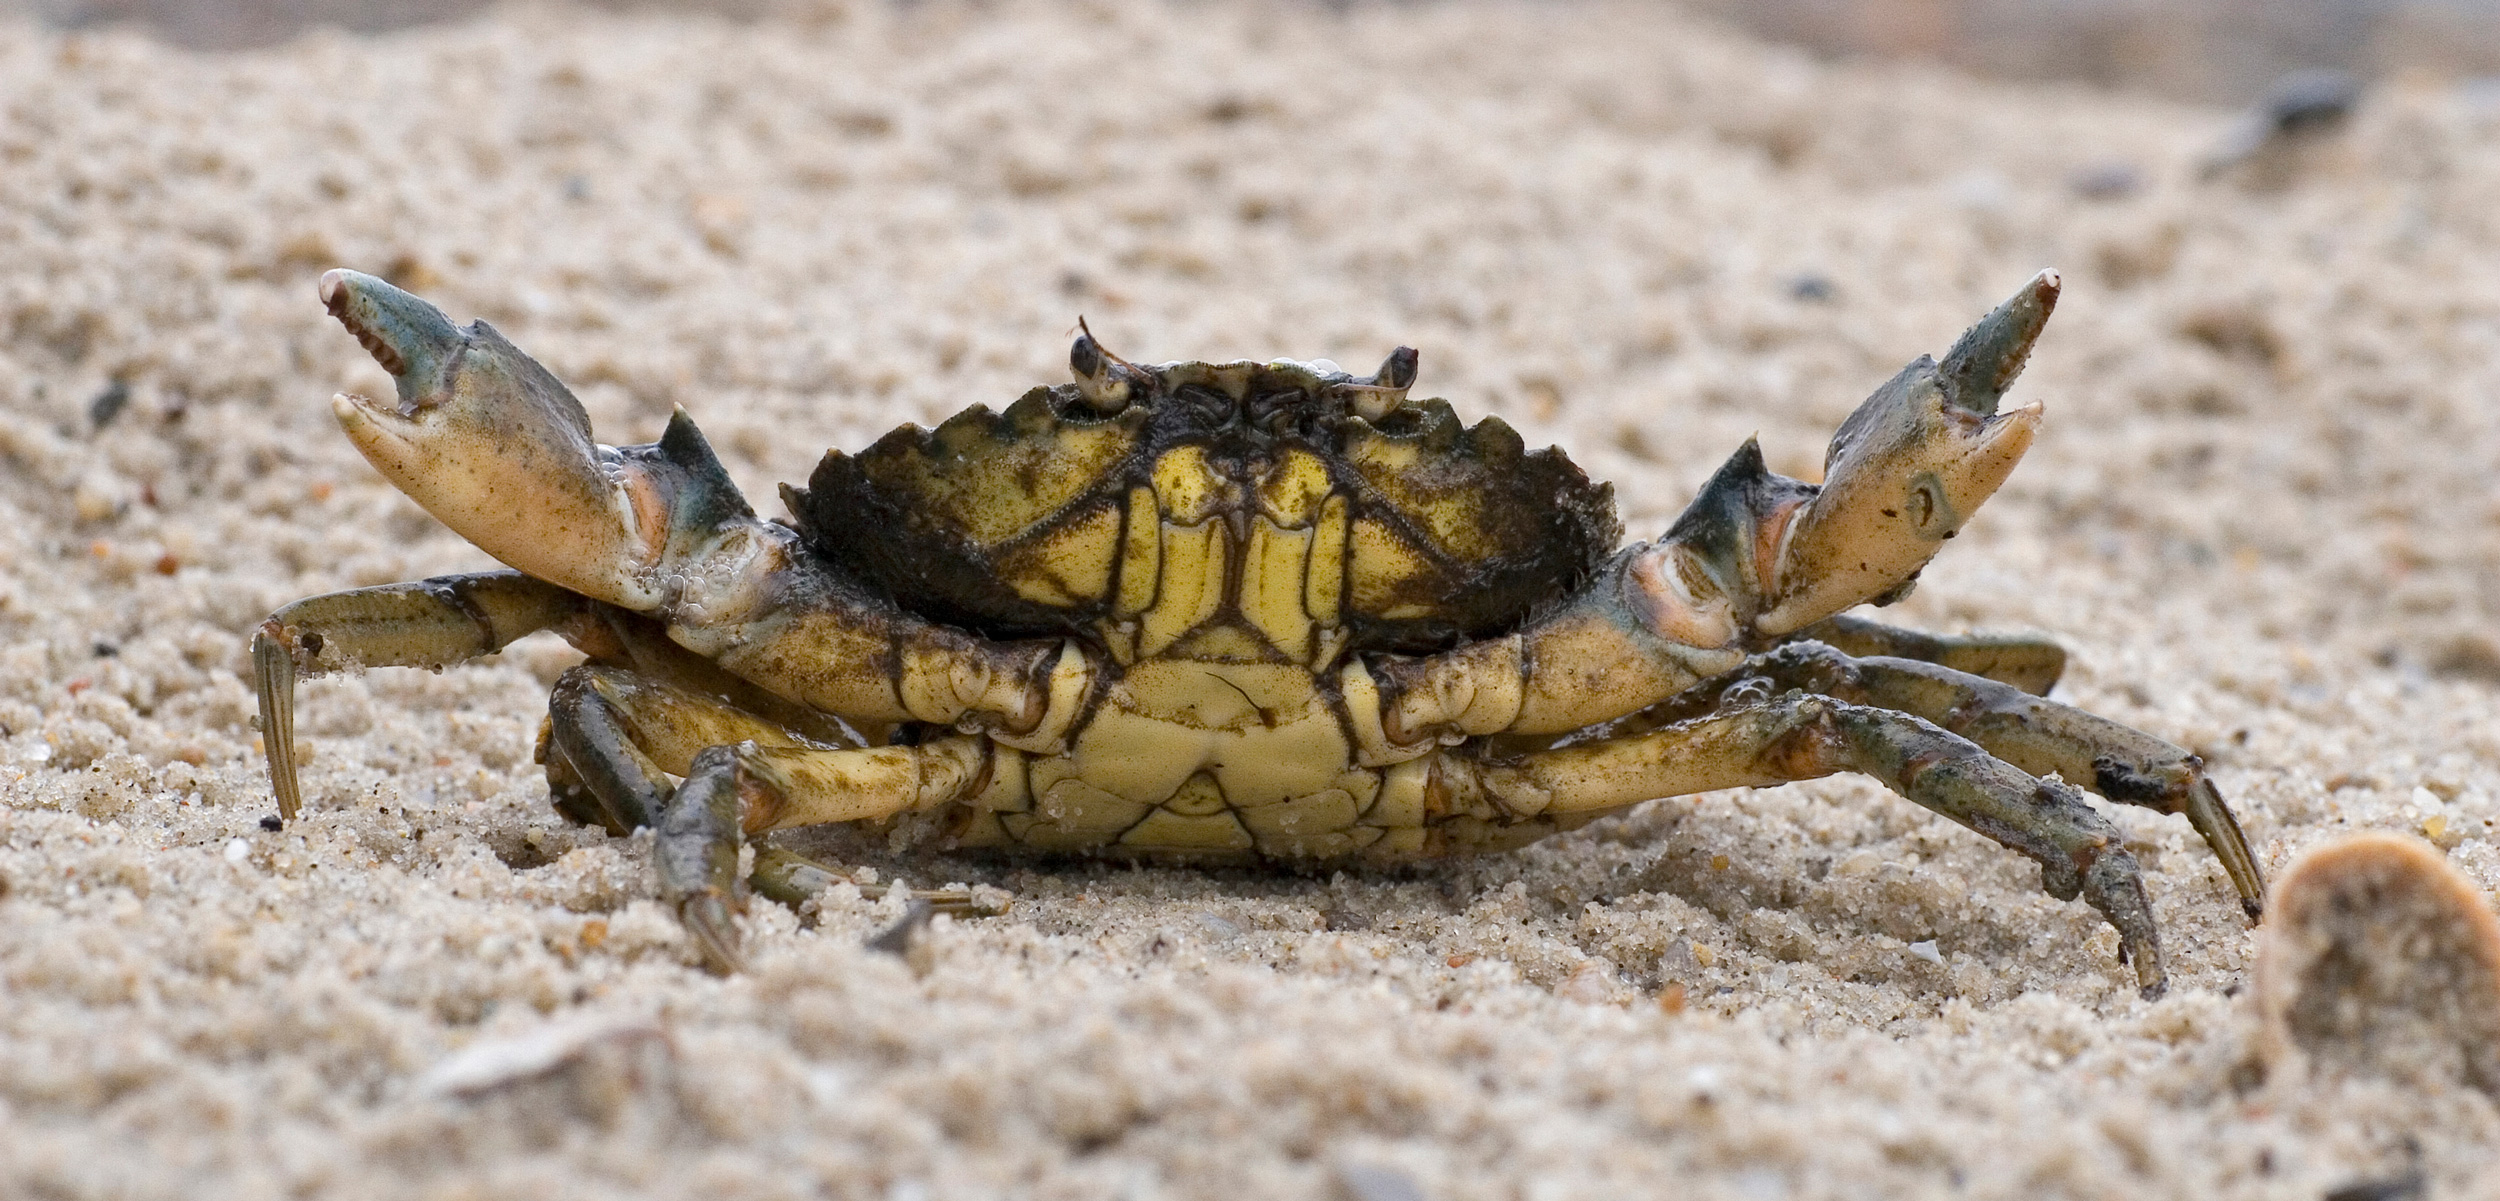 Green Crabs Are Officially Delicious Hakai Magazine,How To Make Candles